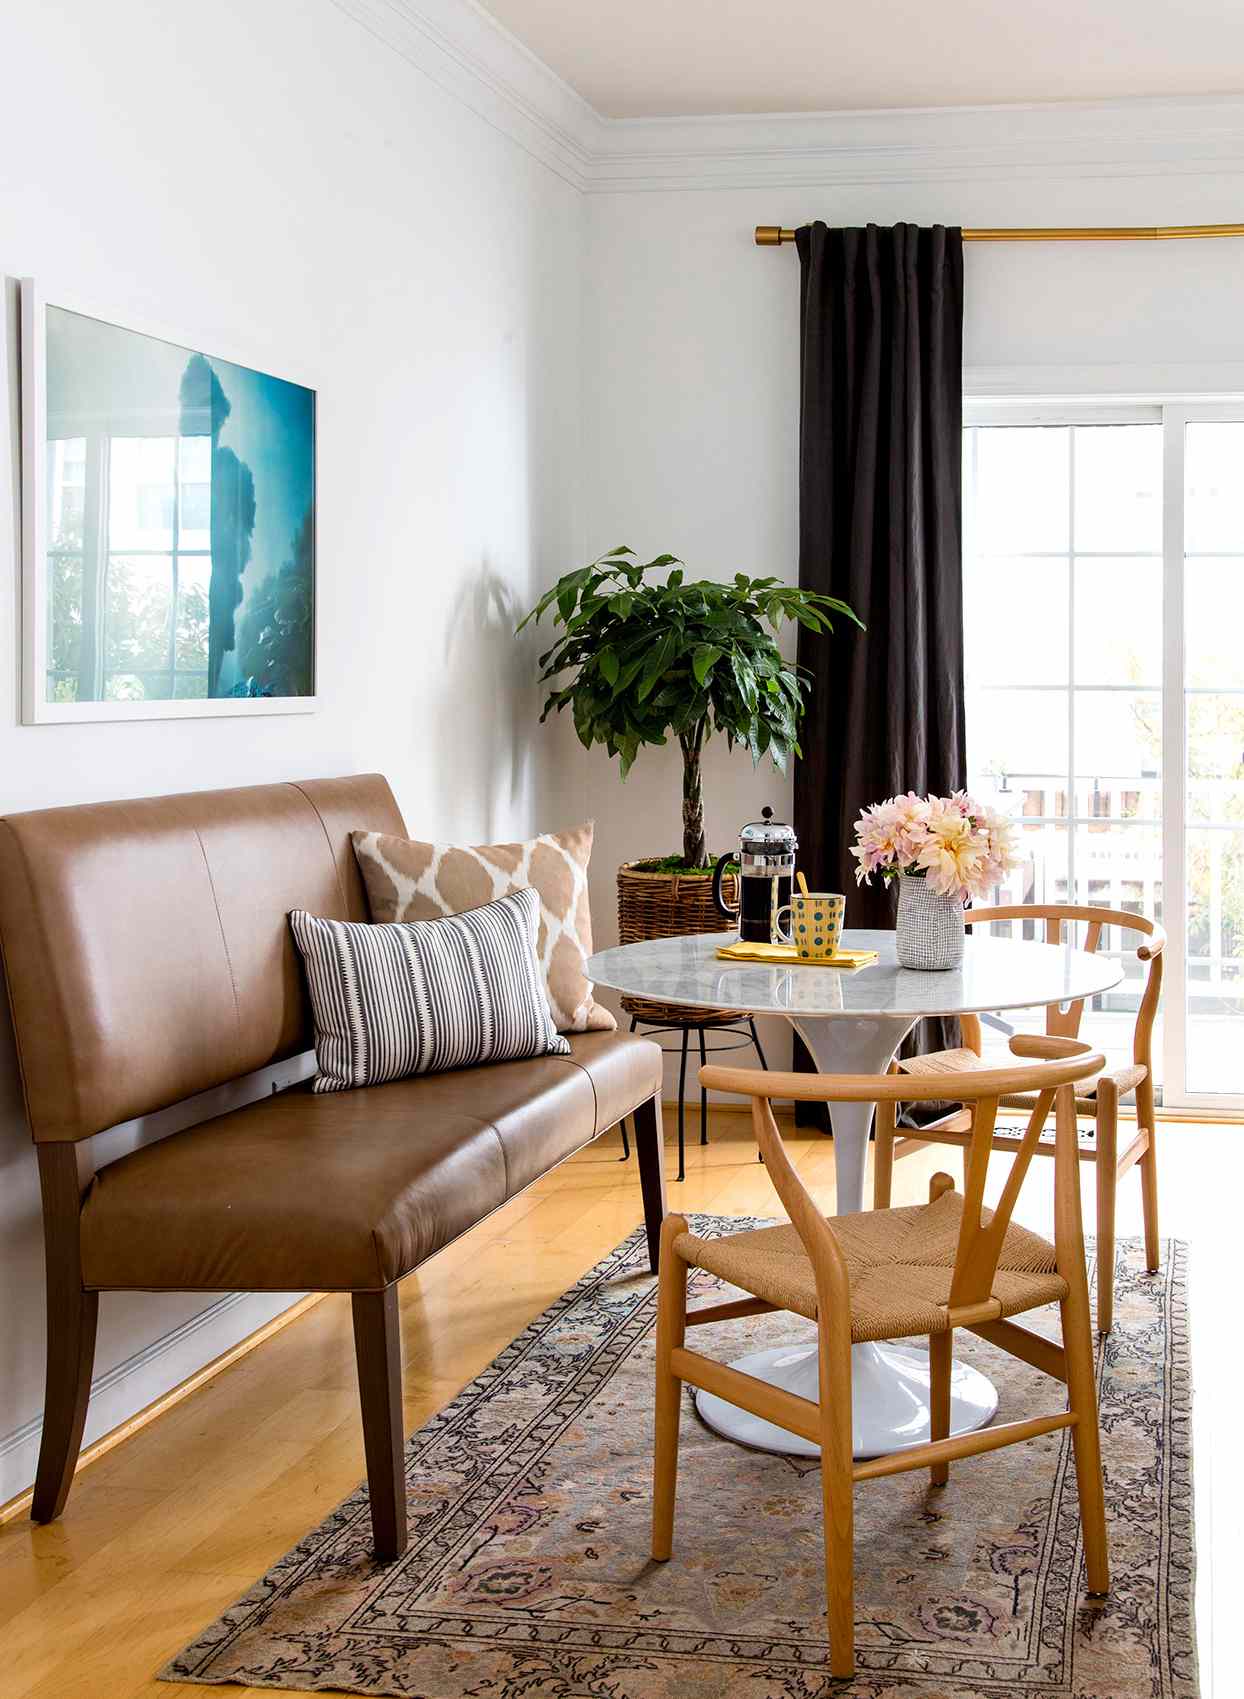 15 Small Dining Room Ideas To Make The, Cyber Monday Dining Room Setup